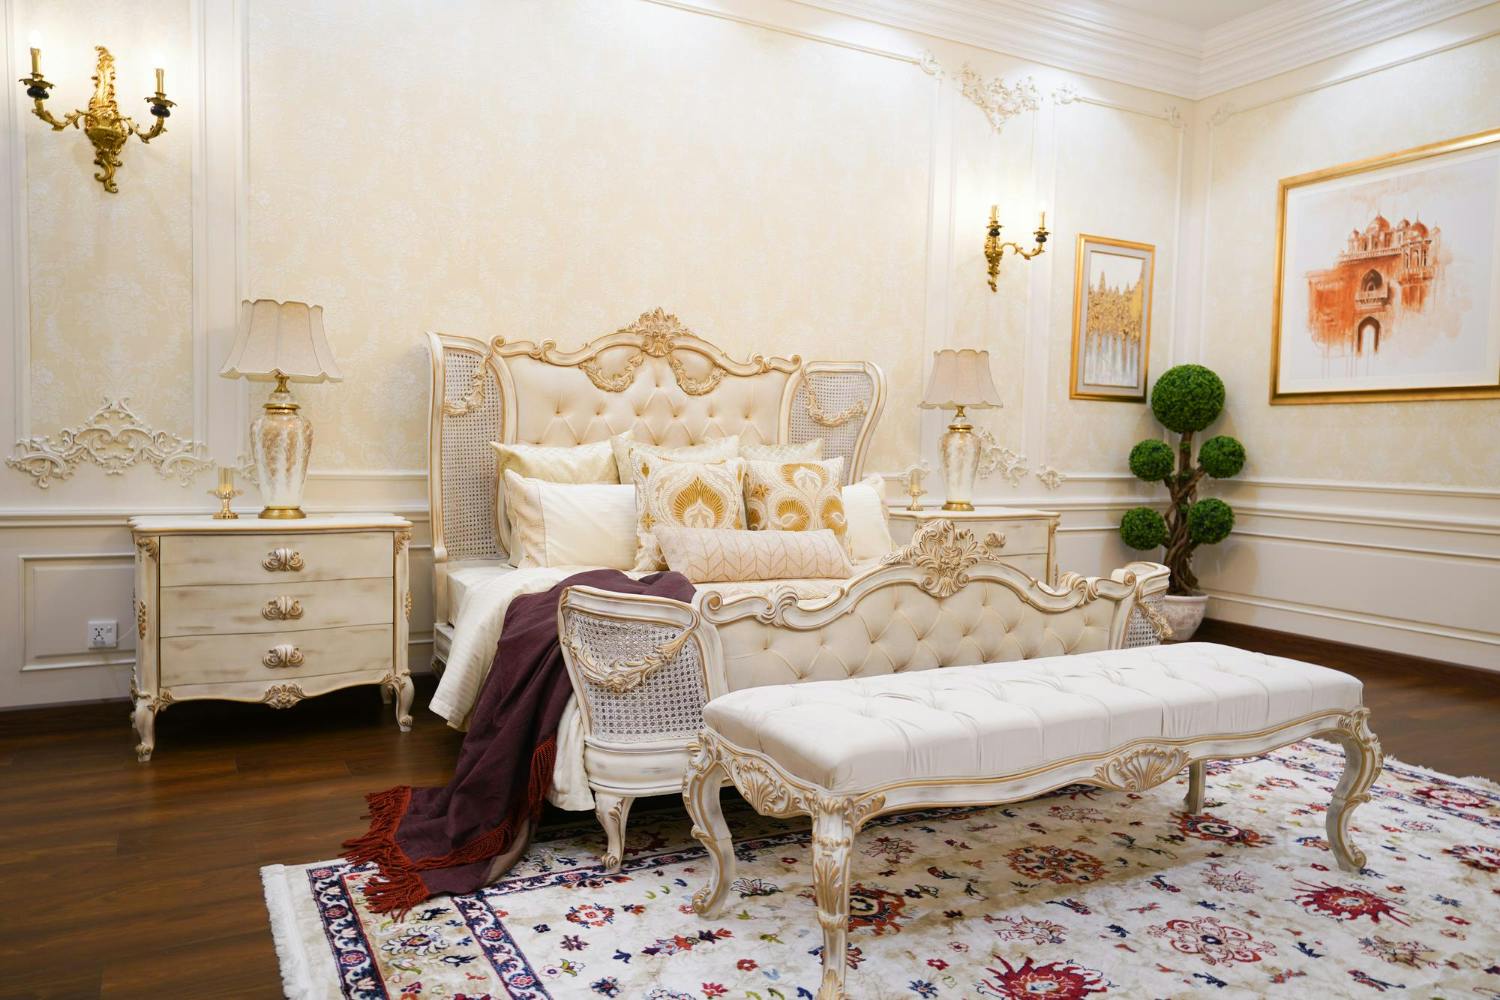 Creating a Tranquil Bedroom Space: The Juliana Bedroom Collection